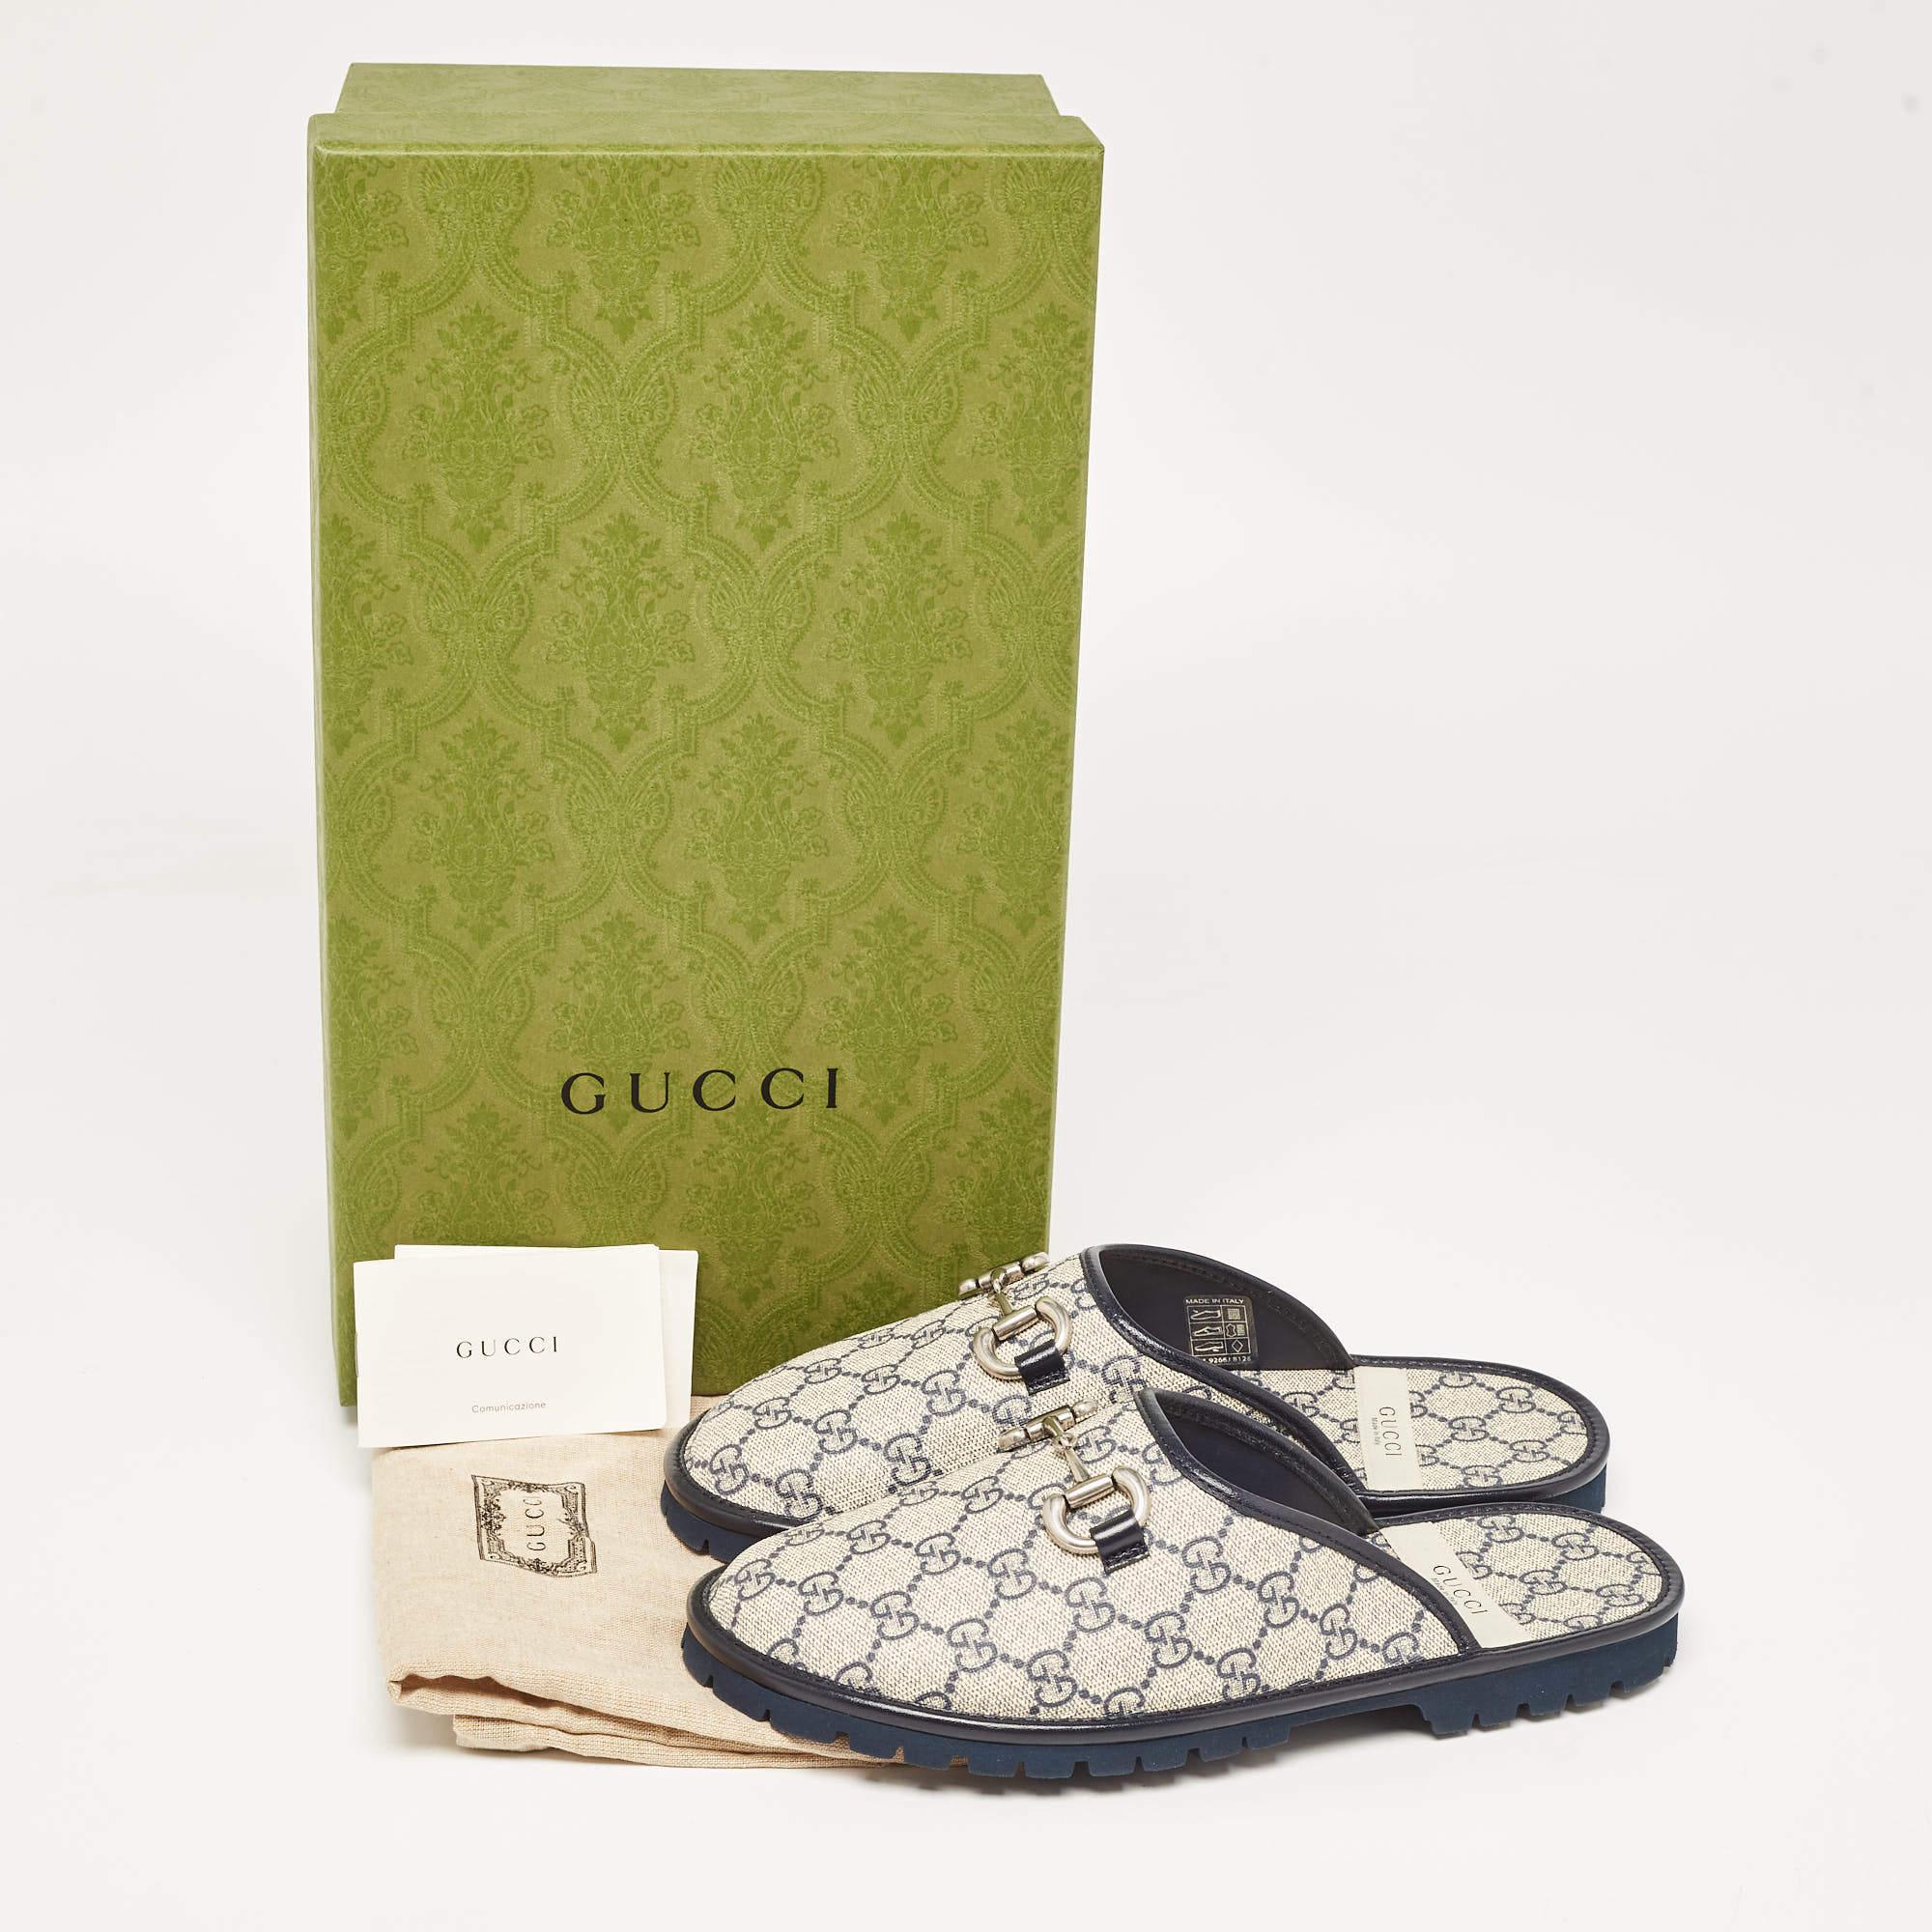 Gucci Blue/Beige GG Canvas and Leather Horsebit Flat Mules Size 40 4